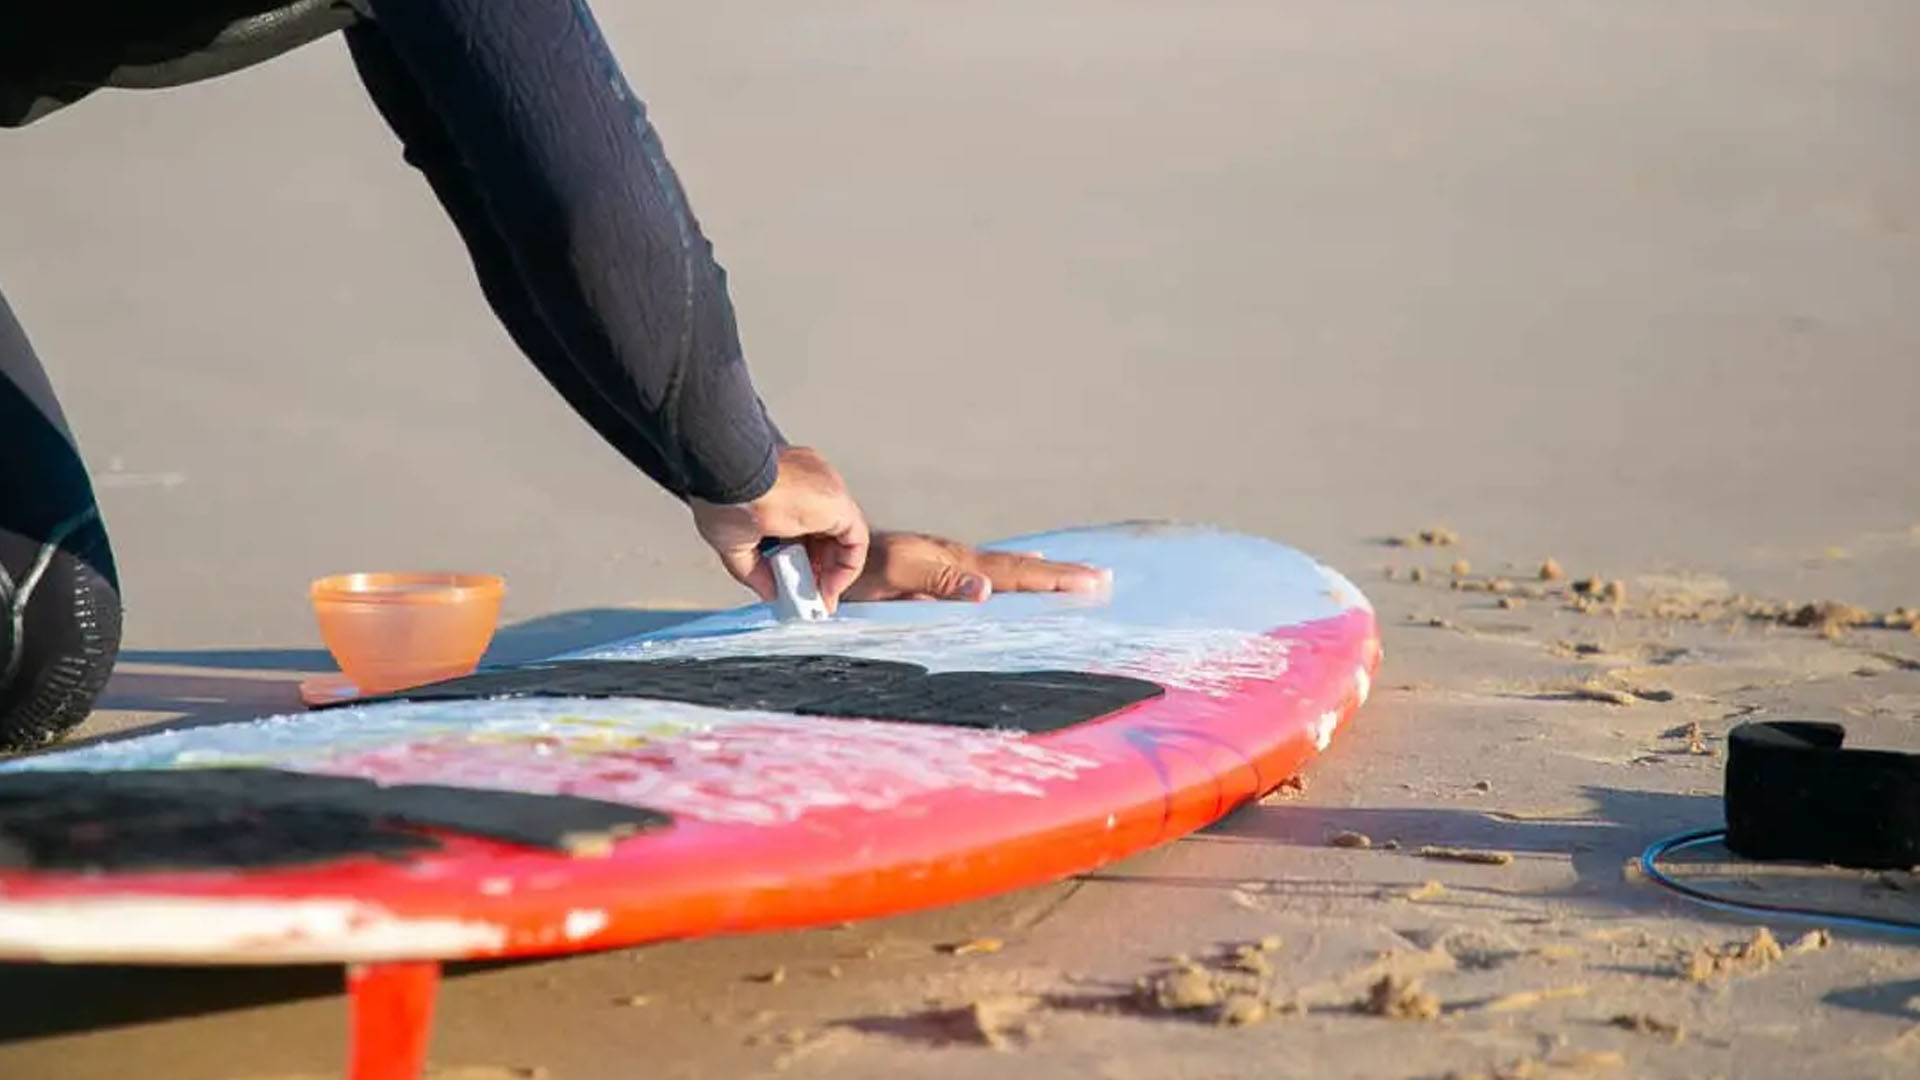 Wax Surfboard - A Comprehensive Guide to Waxing Your Surfboard